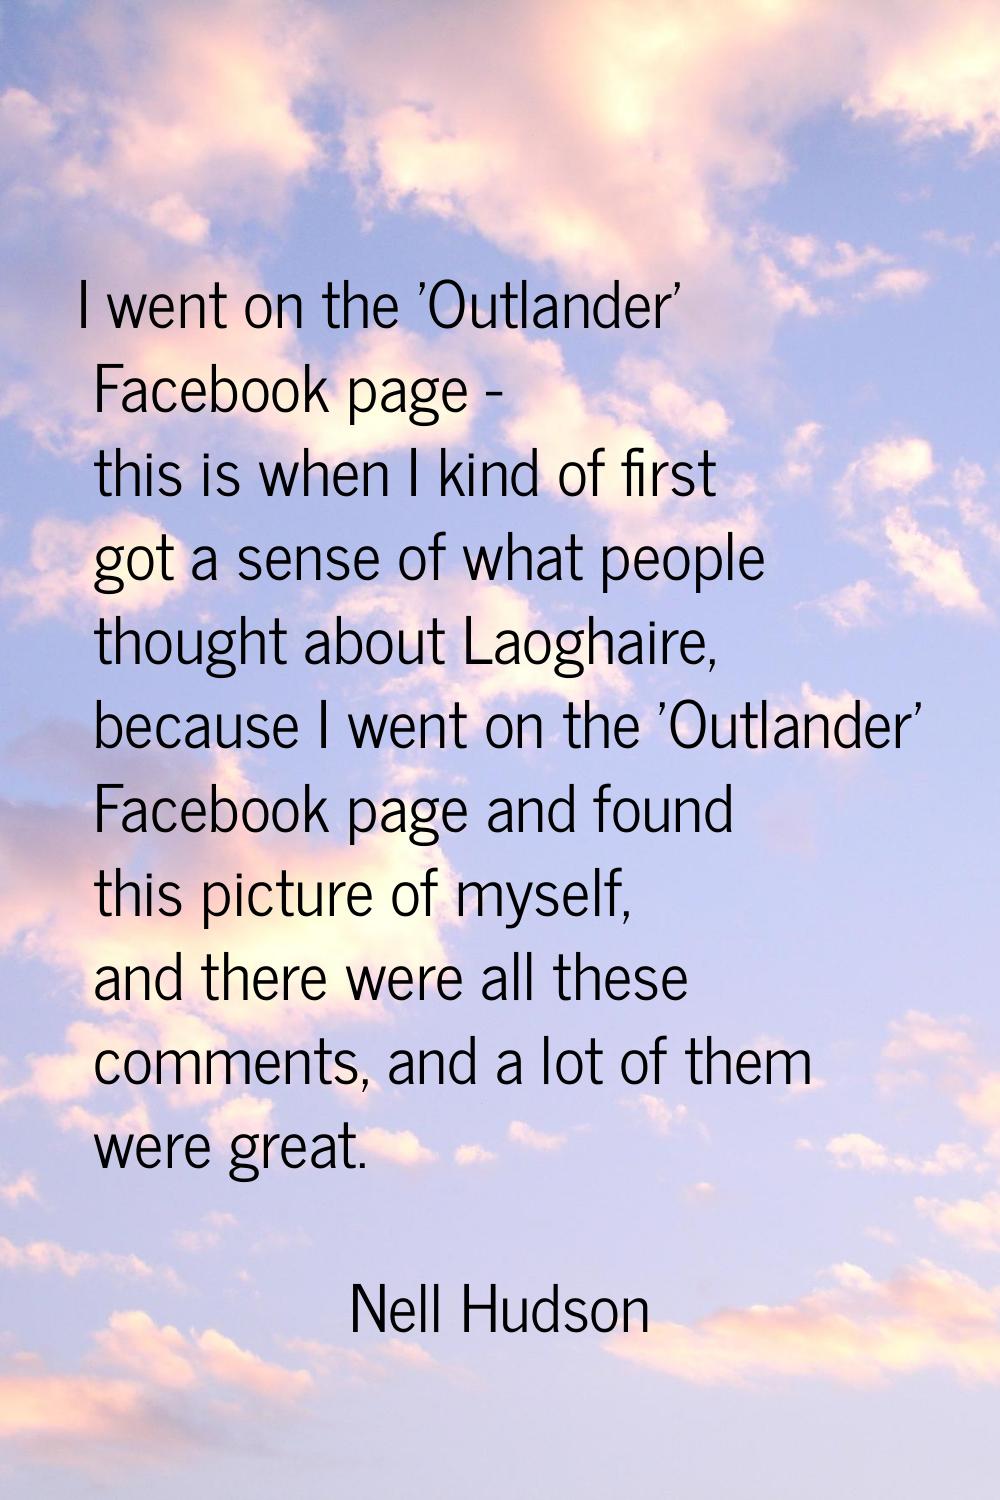 I went on the 'Outlander' Facebook page - this is when I kind of first got a sense of what people t